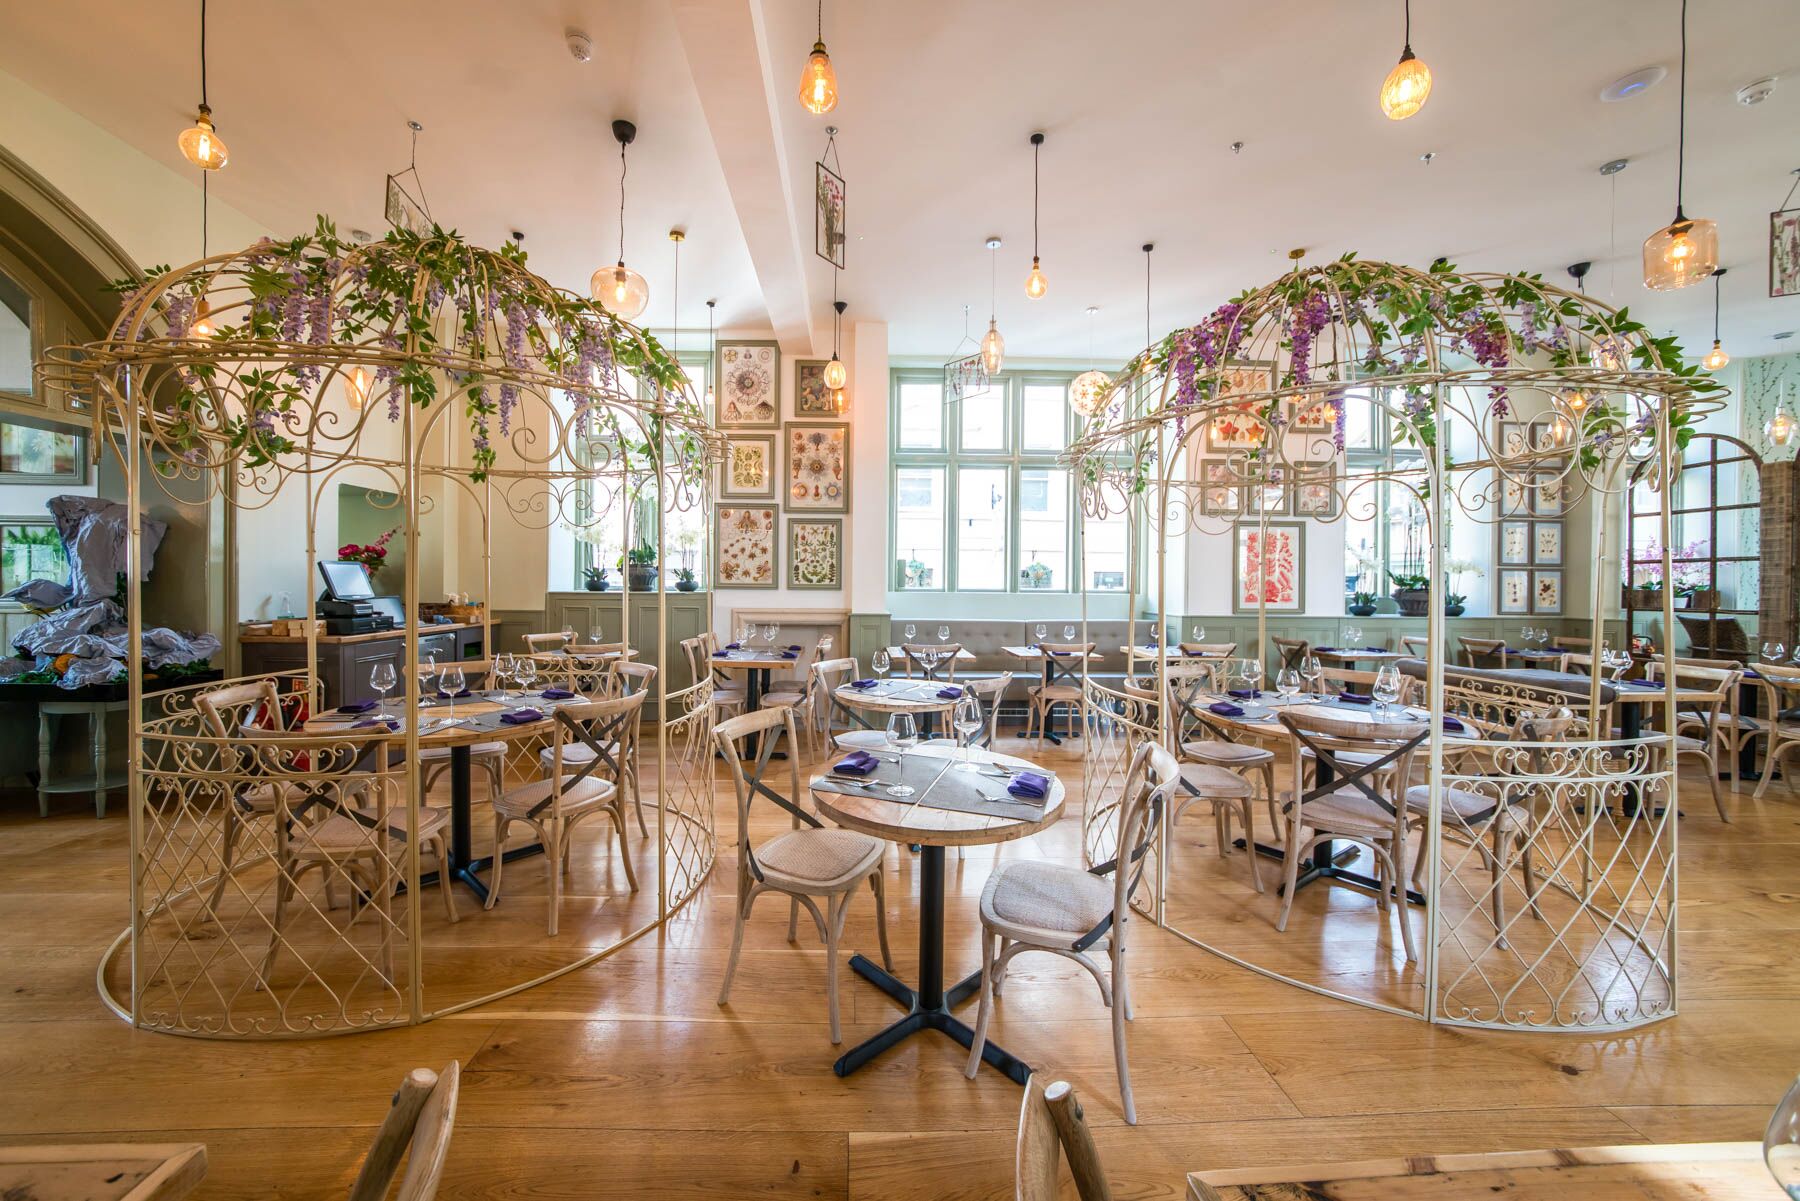 The light-filled interiors of the Giggling Squid restaurant in Bath